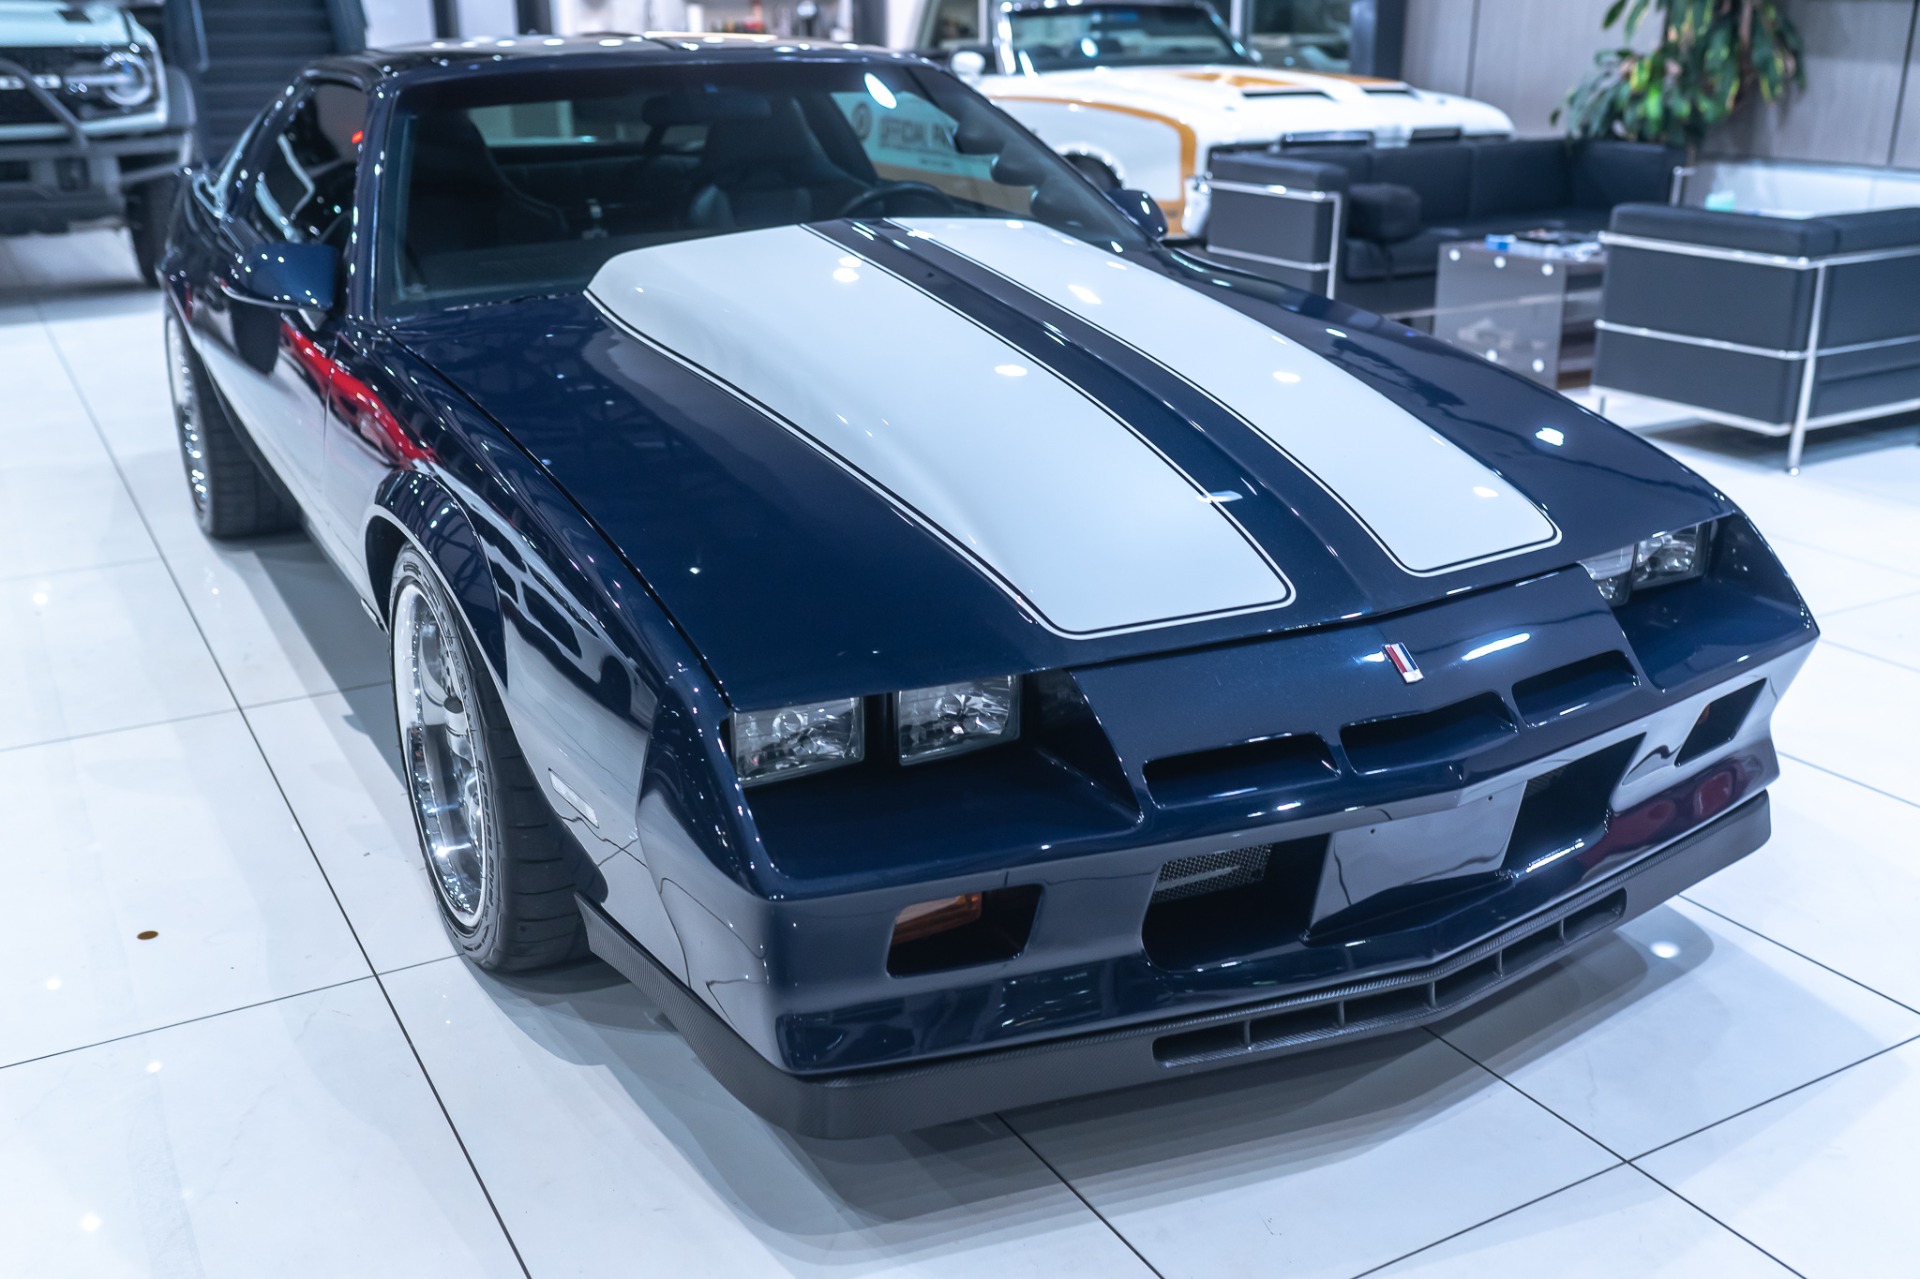 Used-1982-Chevrolet-Camaro-ONE-OWNER-CUSTOM-BUILT-LOW-MILES-629-WHP-614-FTLBS-WITH-FULL-DOCS